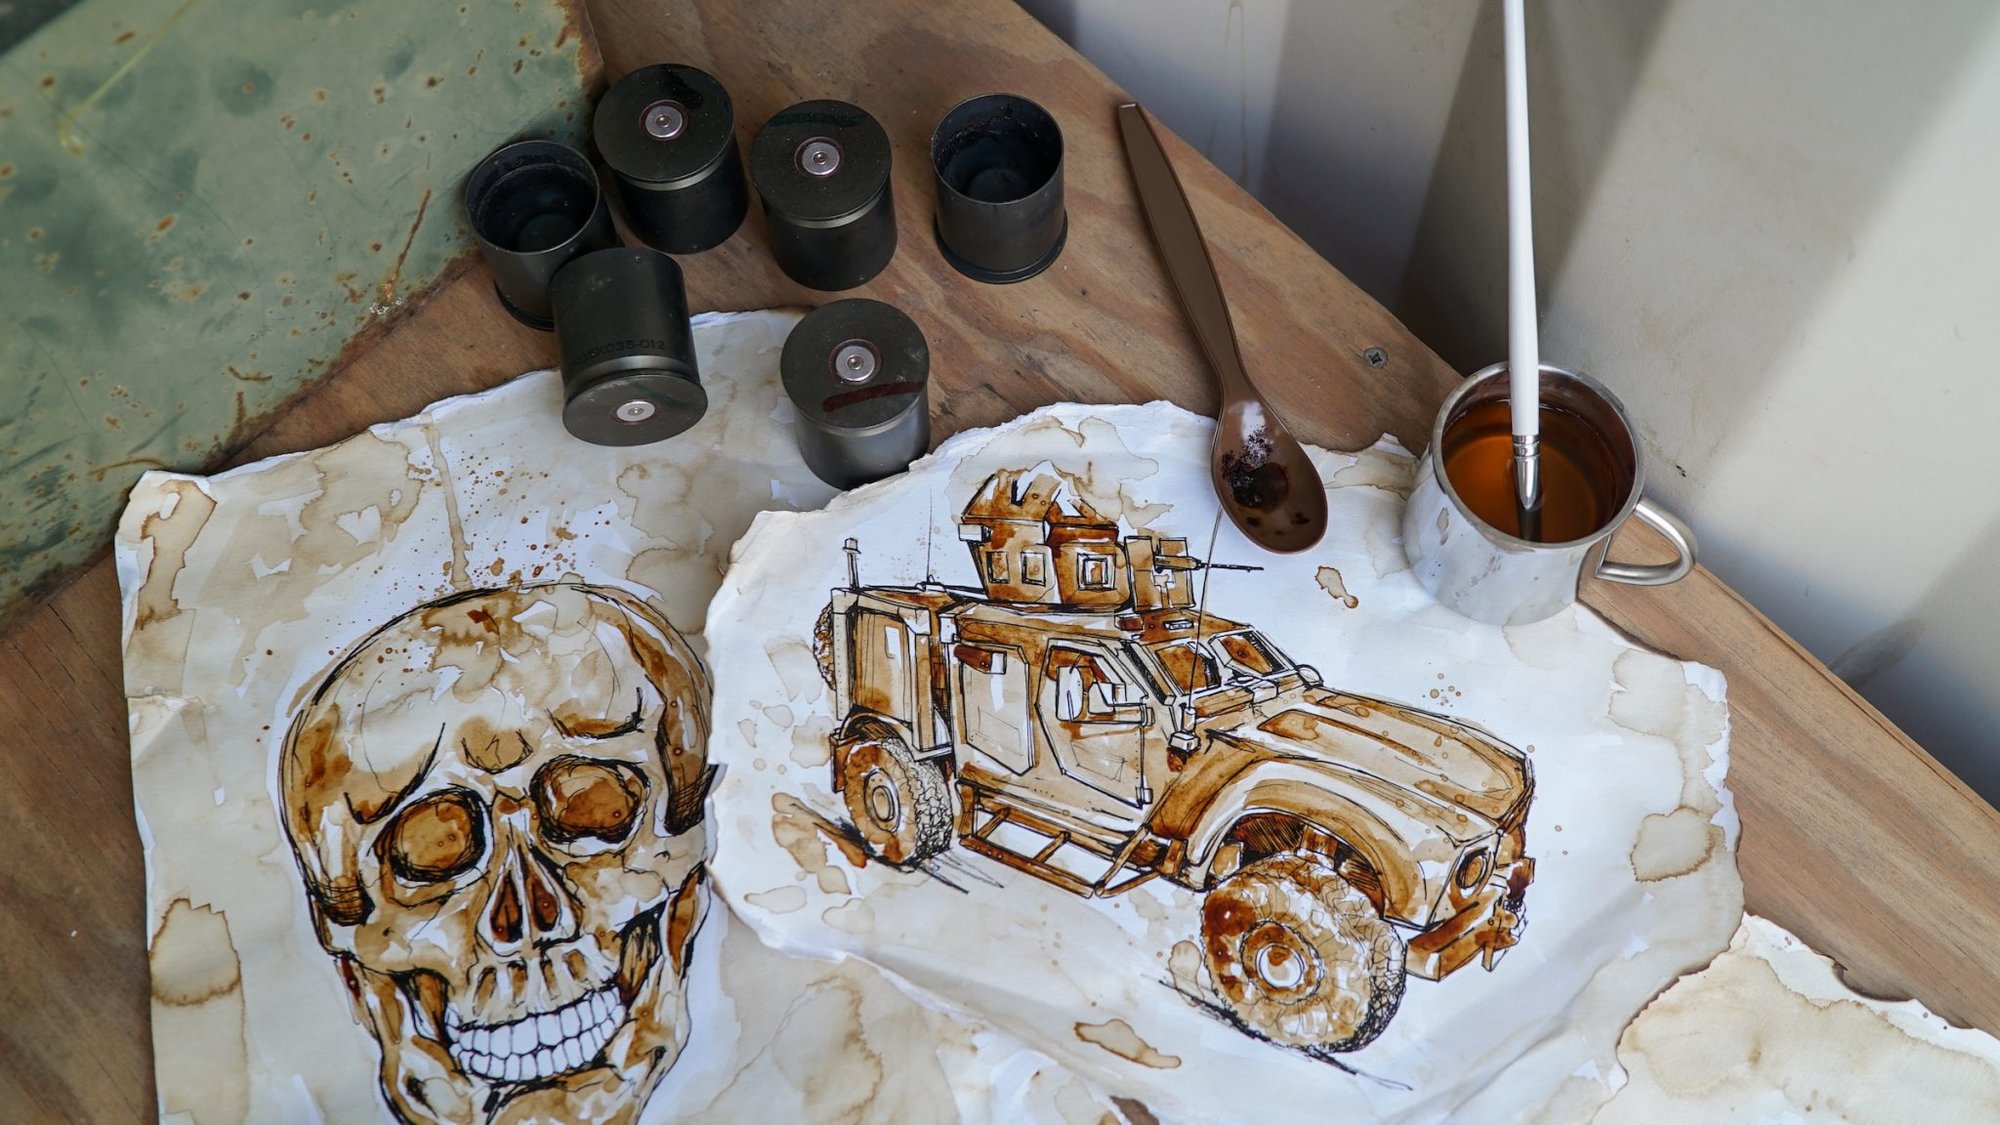 Lundborg painted this skull and a Mine-Resistant Ambush Protected vehicle while serving in East Africa in February 2019. Photo courtesy of Corban Lundborg